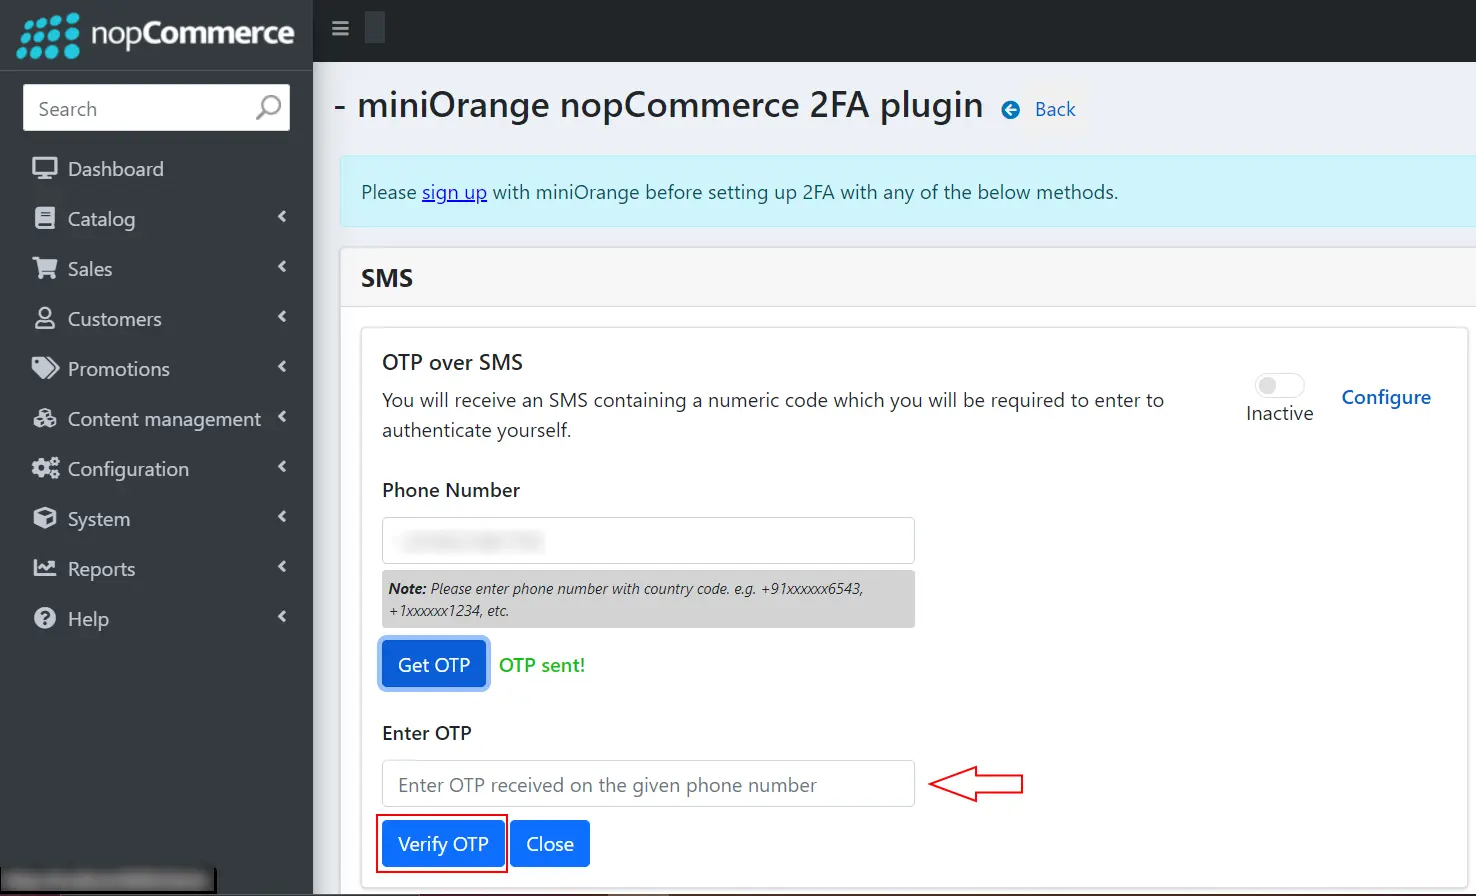 nopCommerce Two-factor Authentication using OTP over SMS | nopCommerce 2FA - OTP over SMS Enter OTP